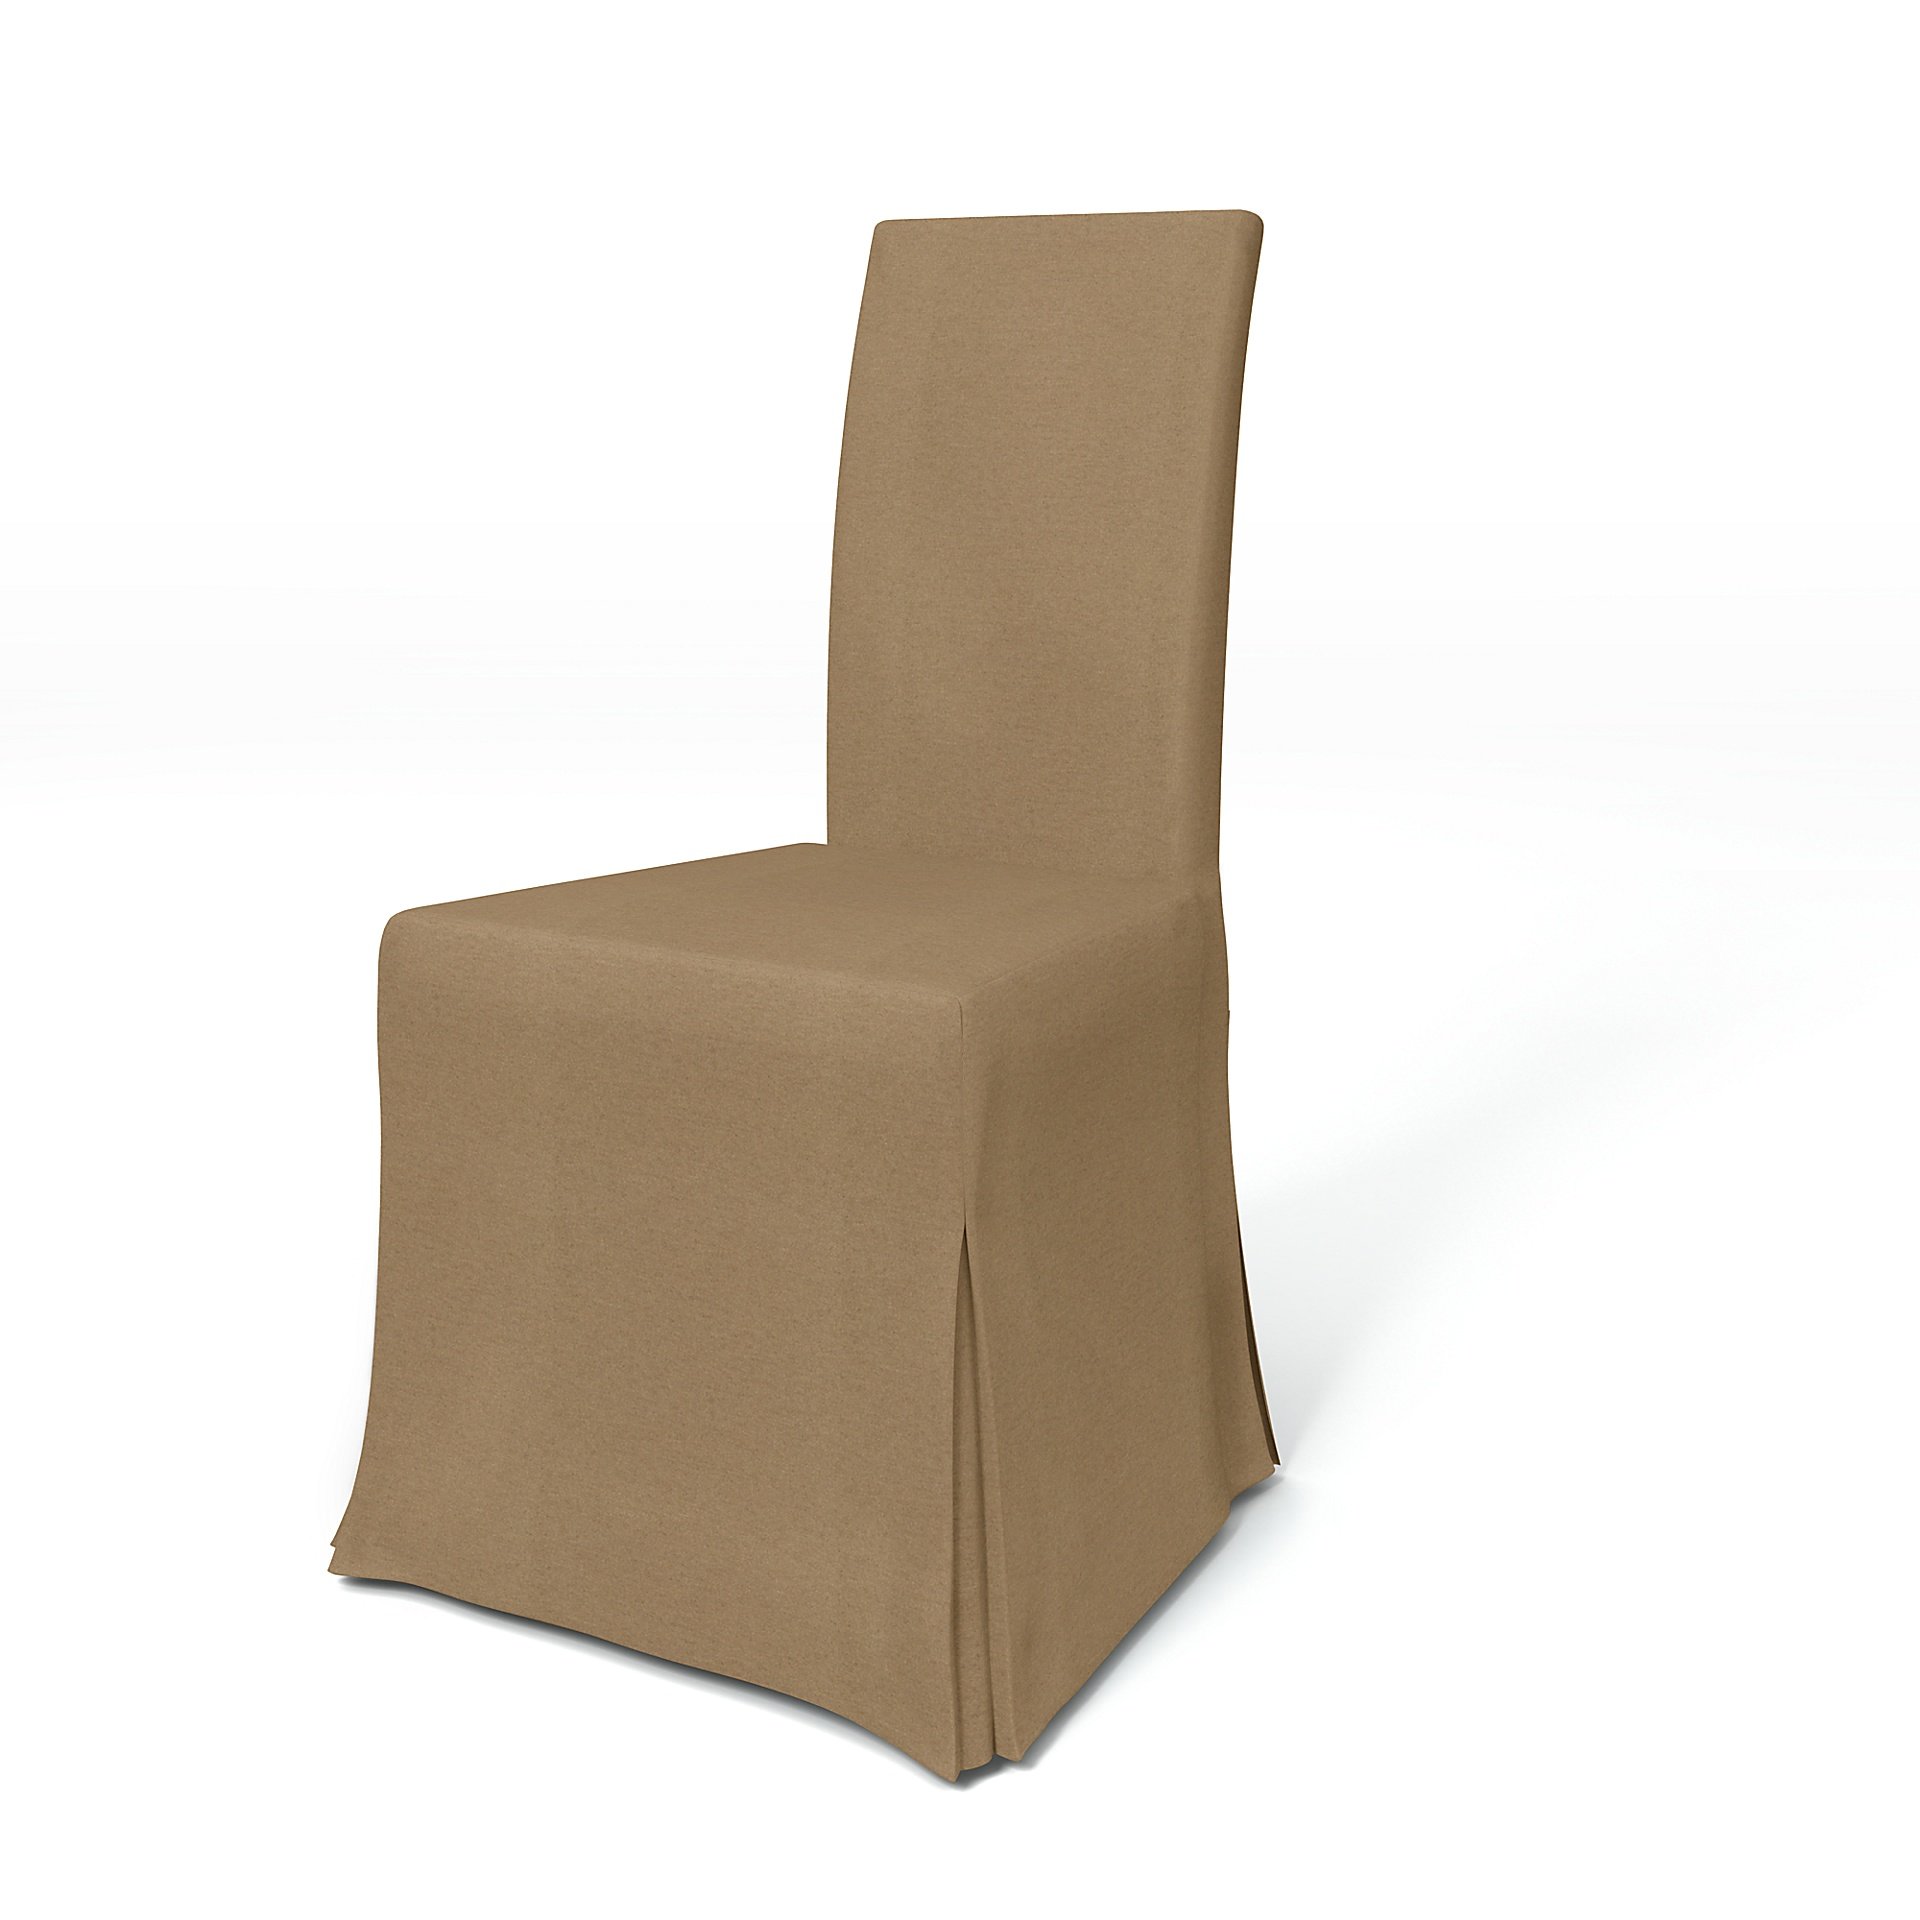 IKEA - Harry Dining Chair Cover, Sand, Wool - Bemz